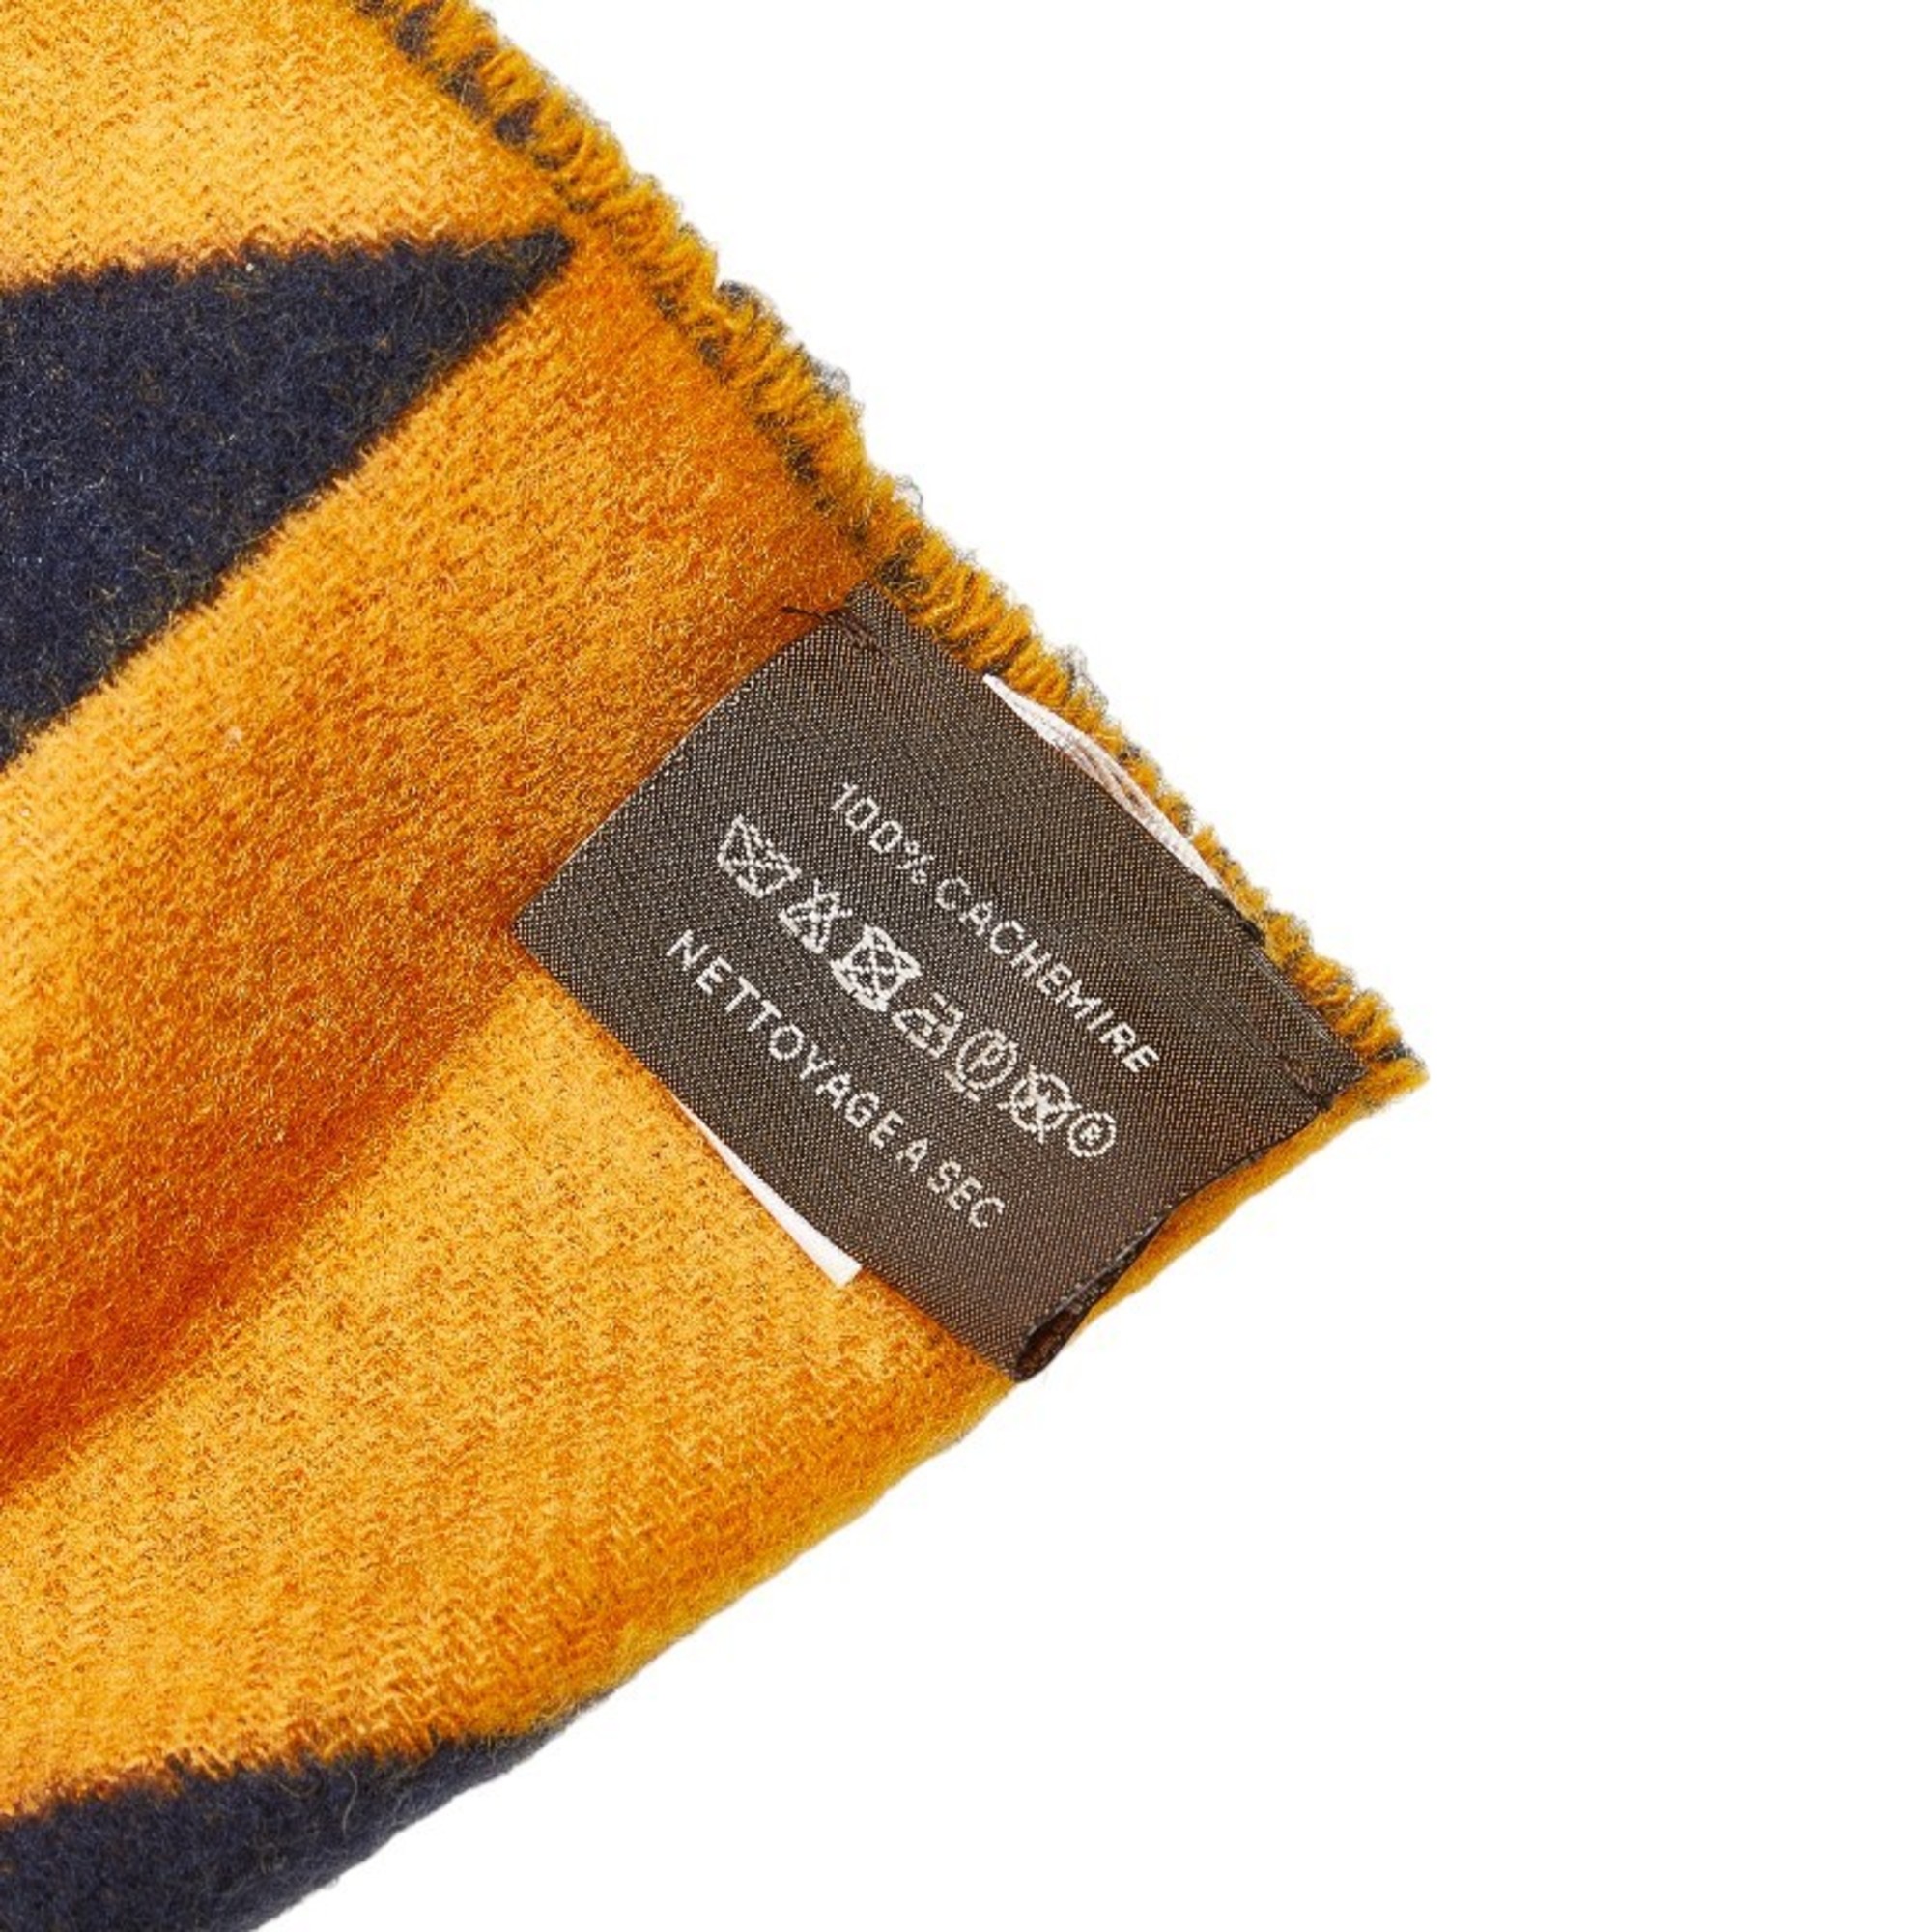 Hermes scarf yellow navy cashmere women's HERMES